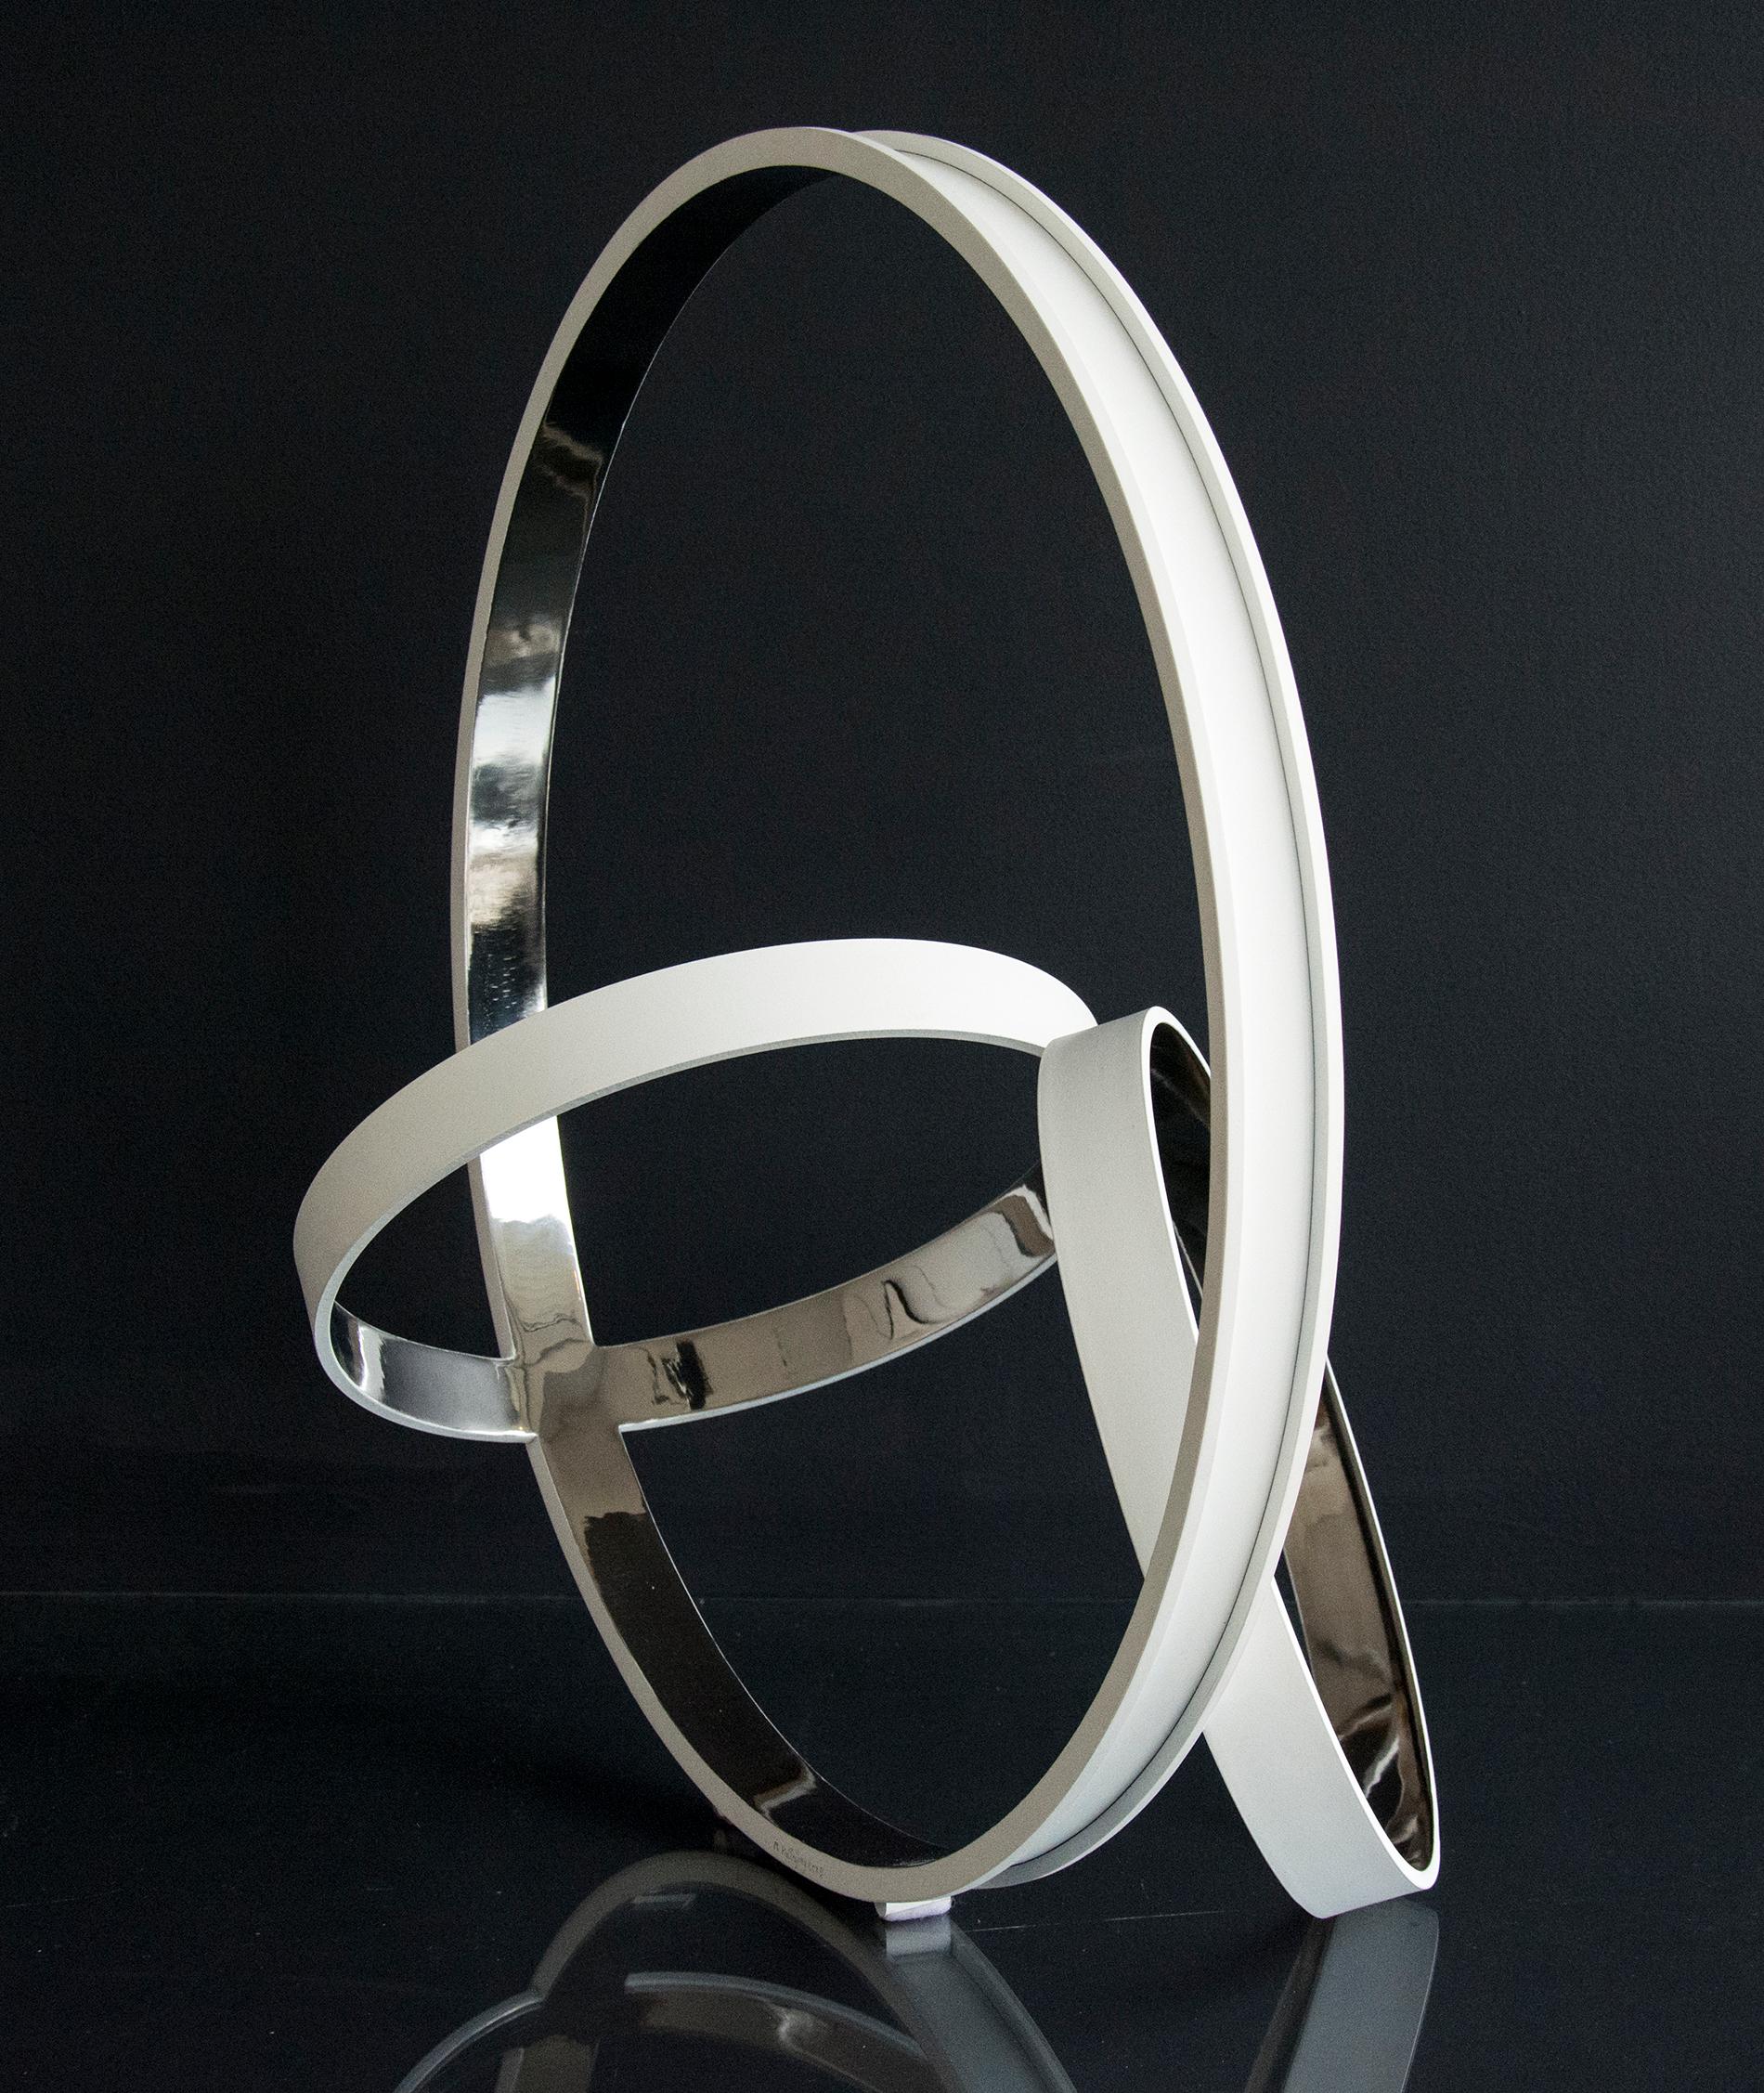 Three rings of stainless steel, polished to a high sheen on the interior and matte white on the exterior, intersect at dynamic angles in this elegant sculpture by Philippe Pallafray.

Philippe Pallafray (b. 1965, France) is a member of the Sculptors